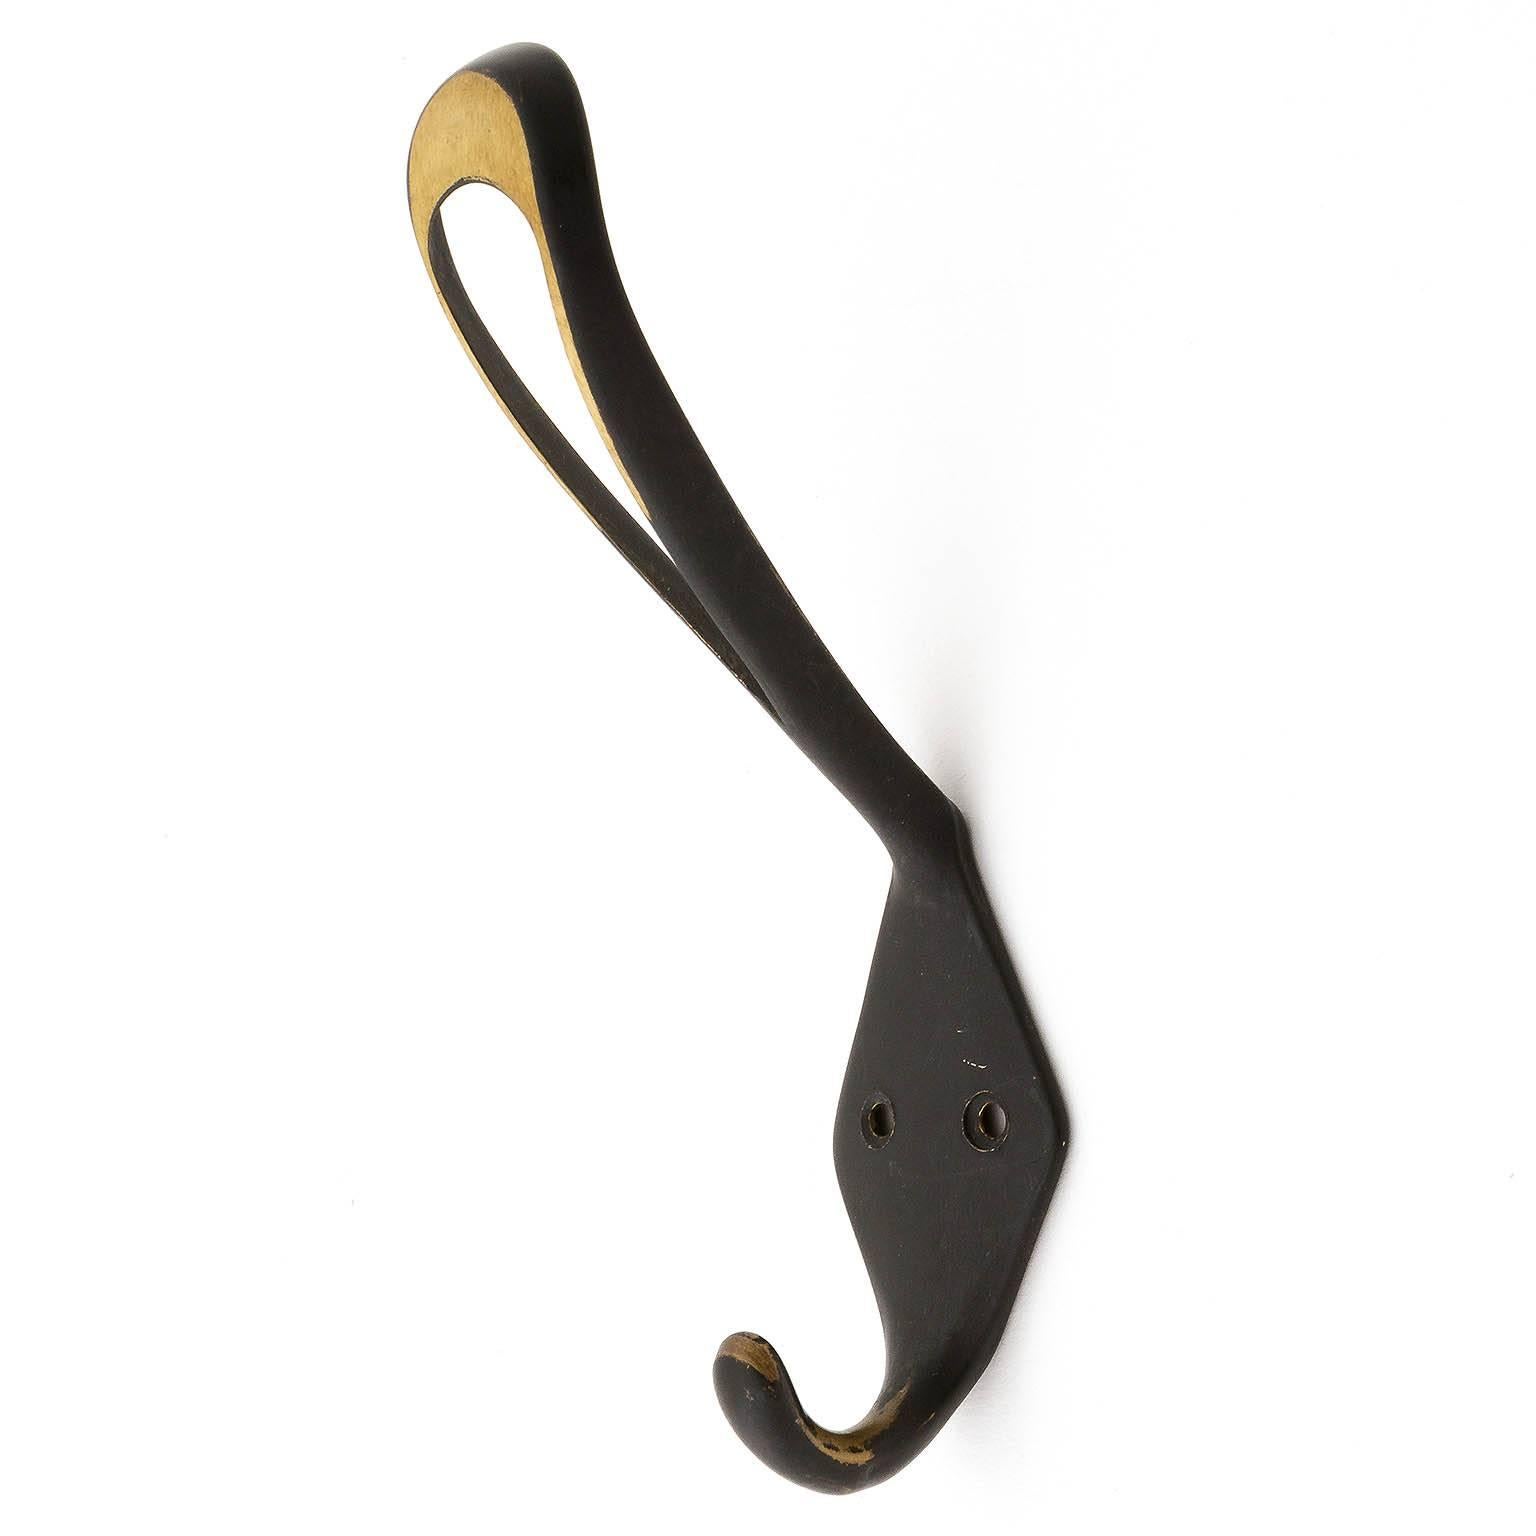 Seven beautiful Austrian brass hooks in the style of Hertha Baller or Carl Auböck, manufactured in the 1950s. They are made of blackened and partly polished solid brass. Lovely patina.
There are further brass coat hooks in different shapes and